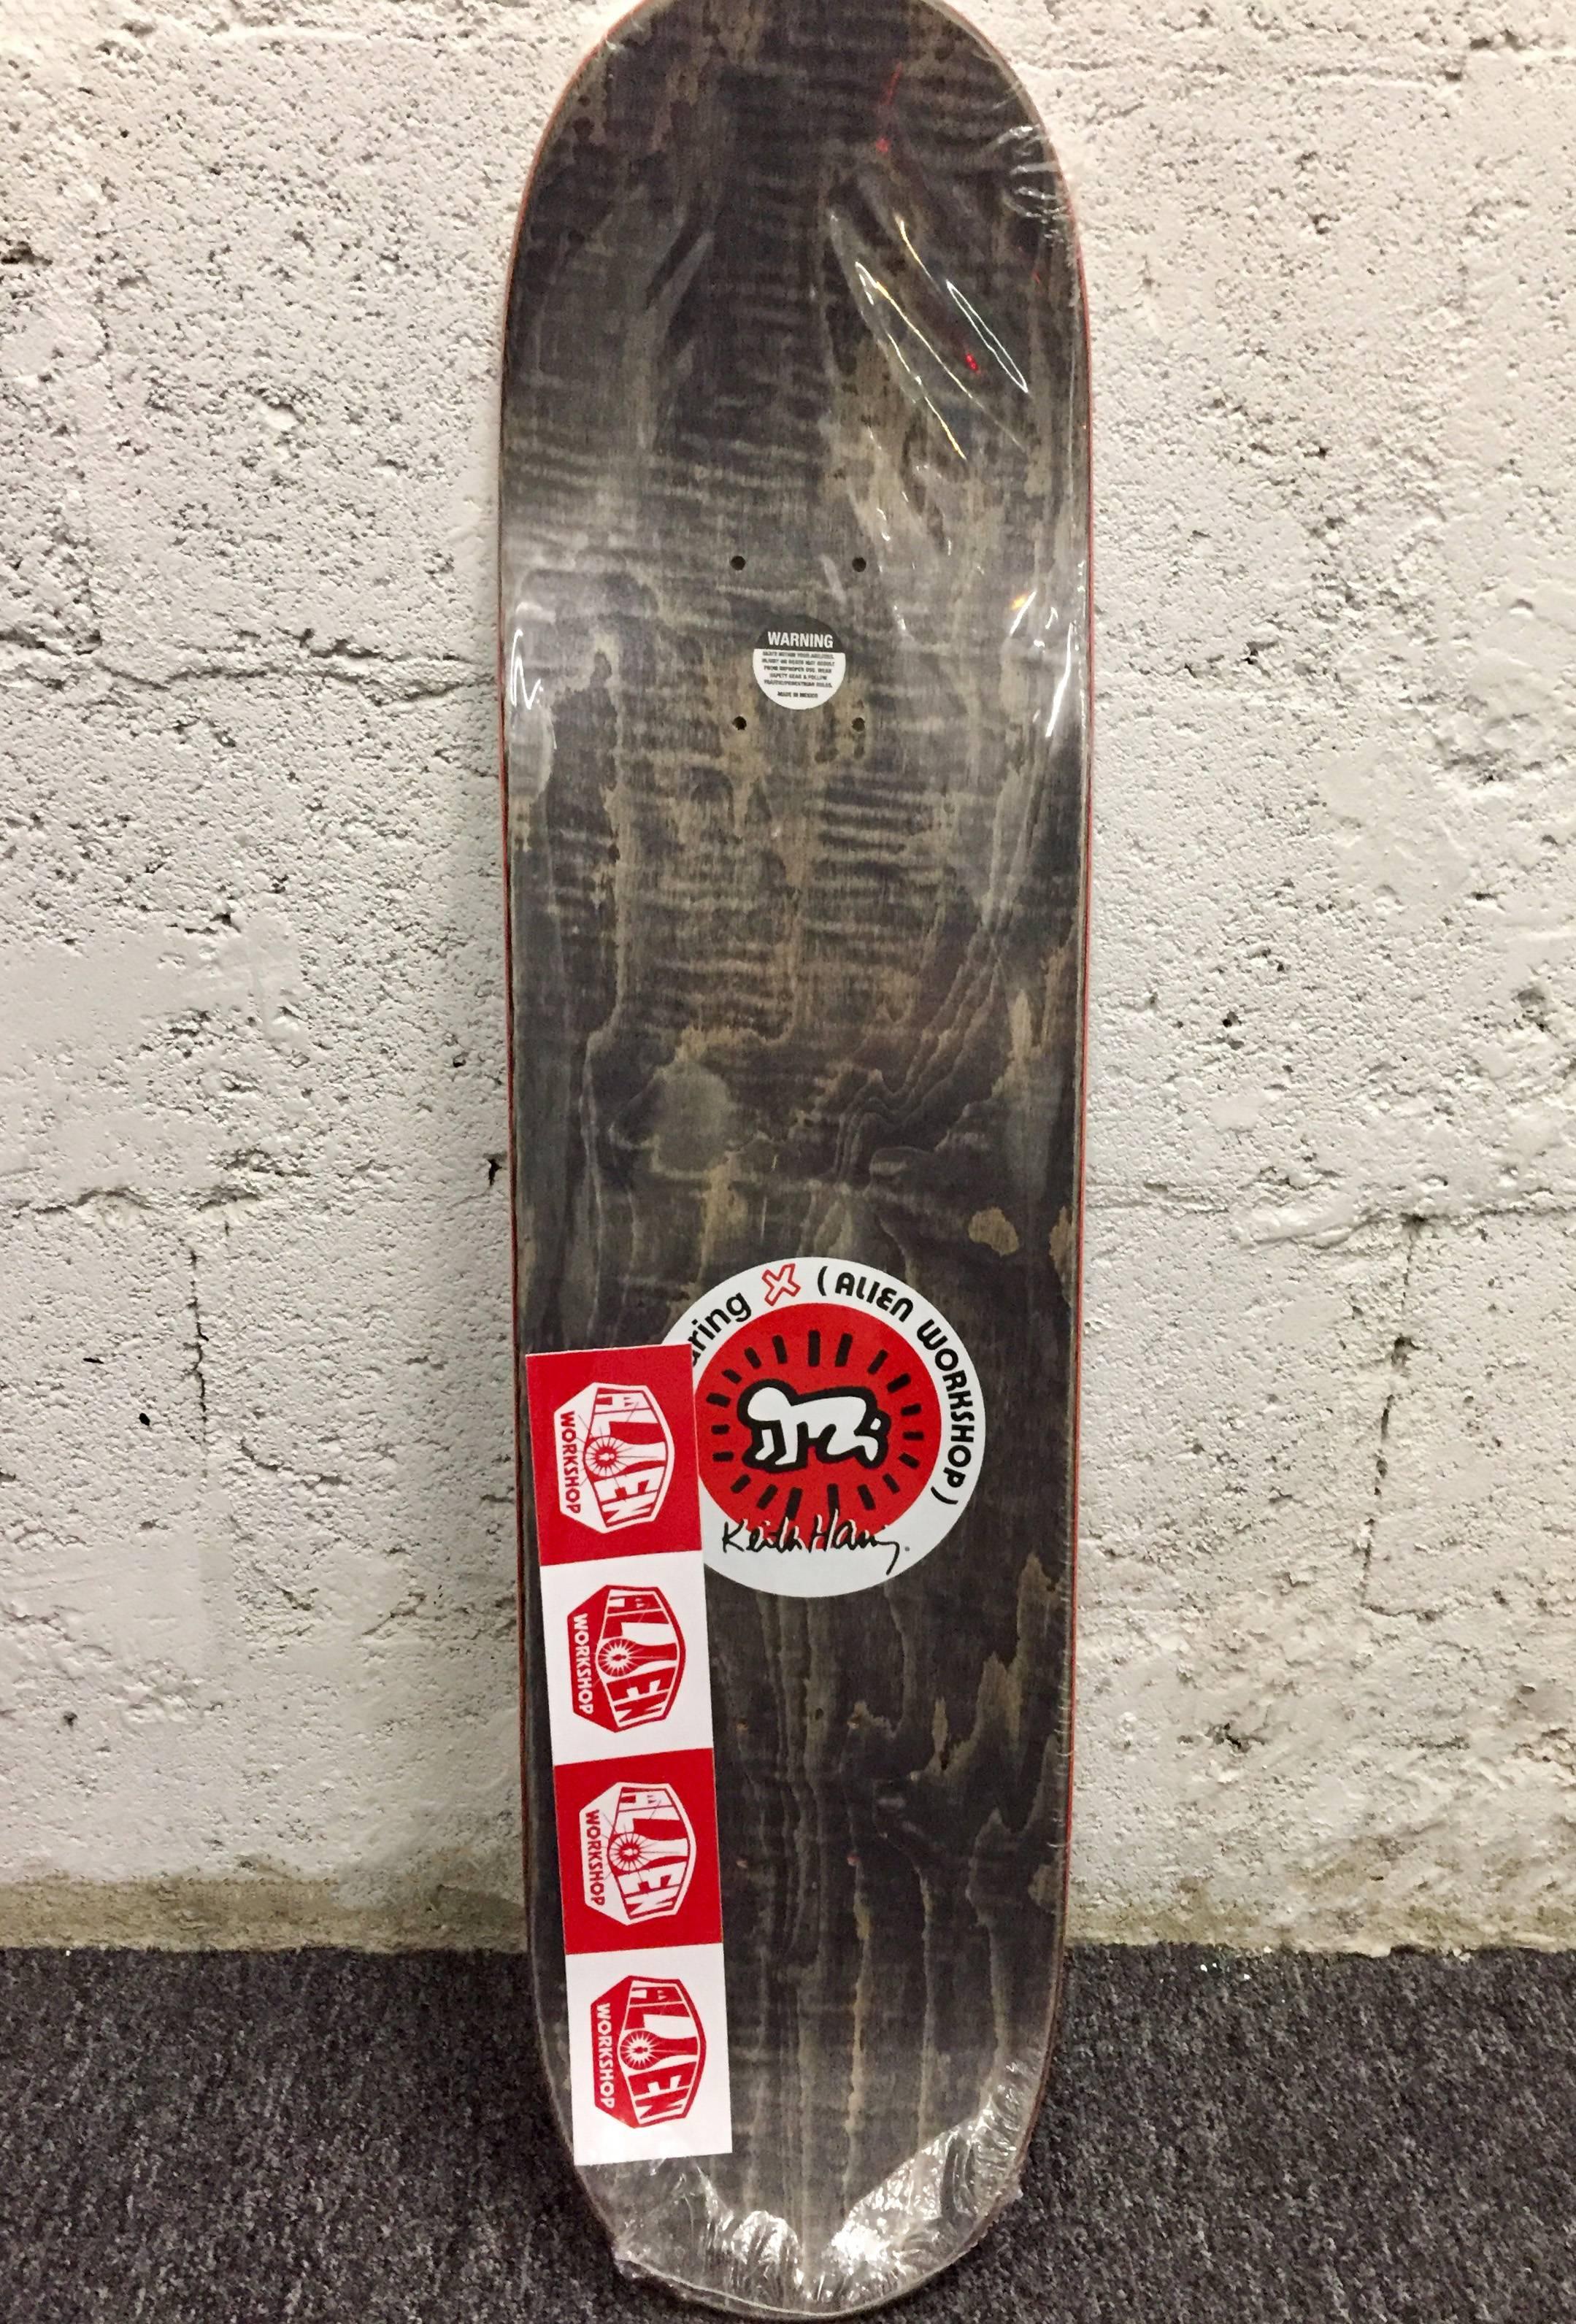 Rare Out of Print 2012 Keith Haring Skate Deck featuring classic Haring iconography.

This work originated circa 2012 as a result of the collaboration between Alien Workshop and the Keith Haring Foundation. The deck is new and in its original